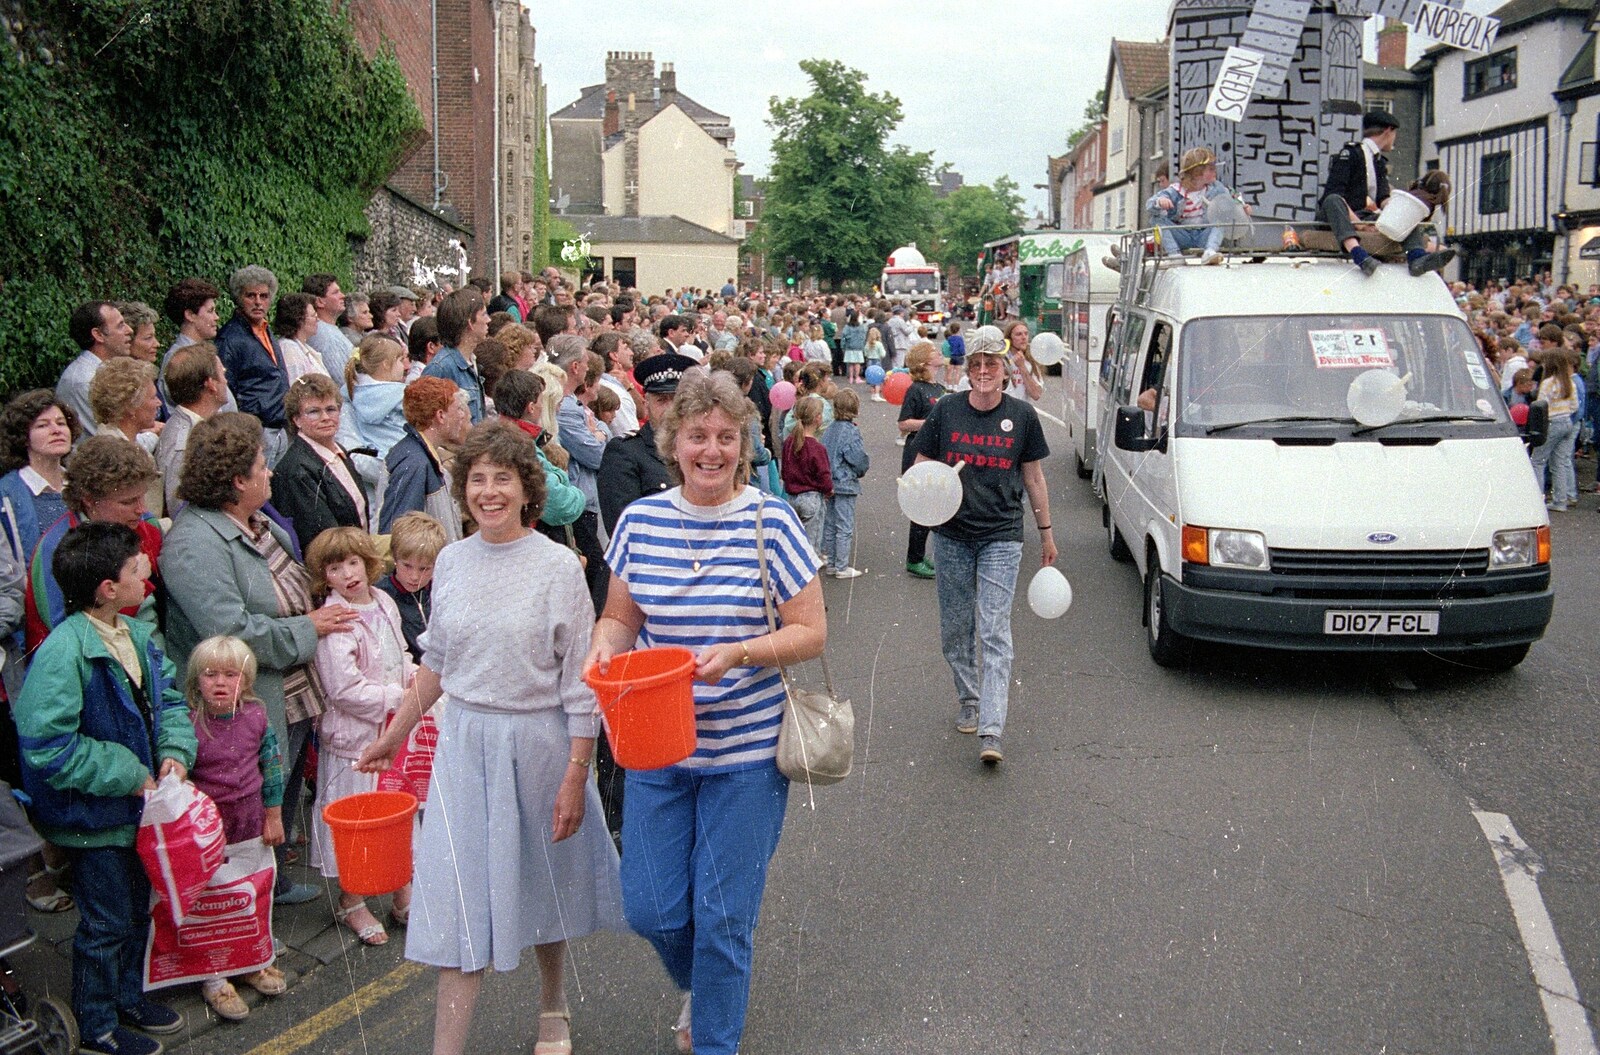 More collecting with buckets from Soman-Wherry and the Lord Mayor's Parade, Norwich - 3rd May 1988